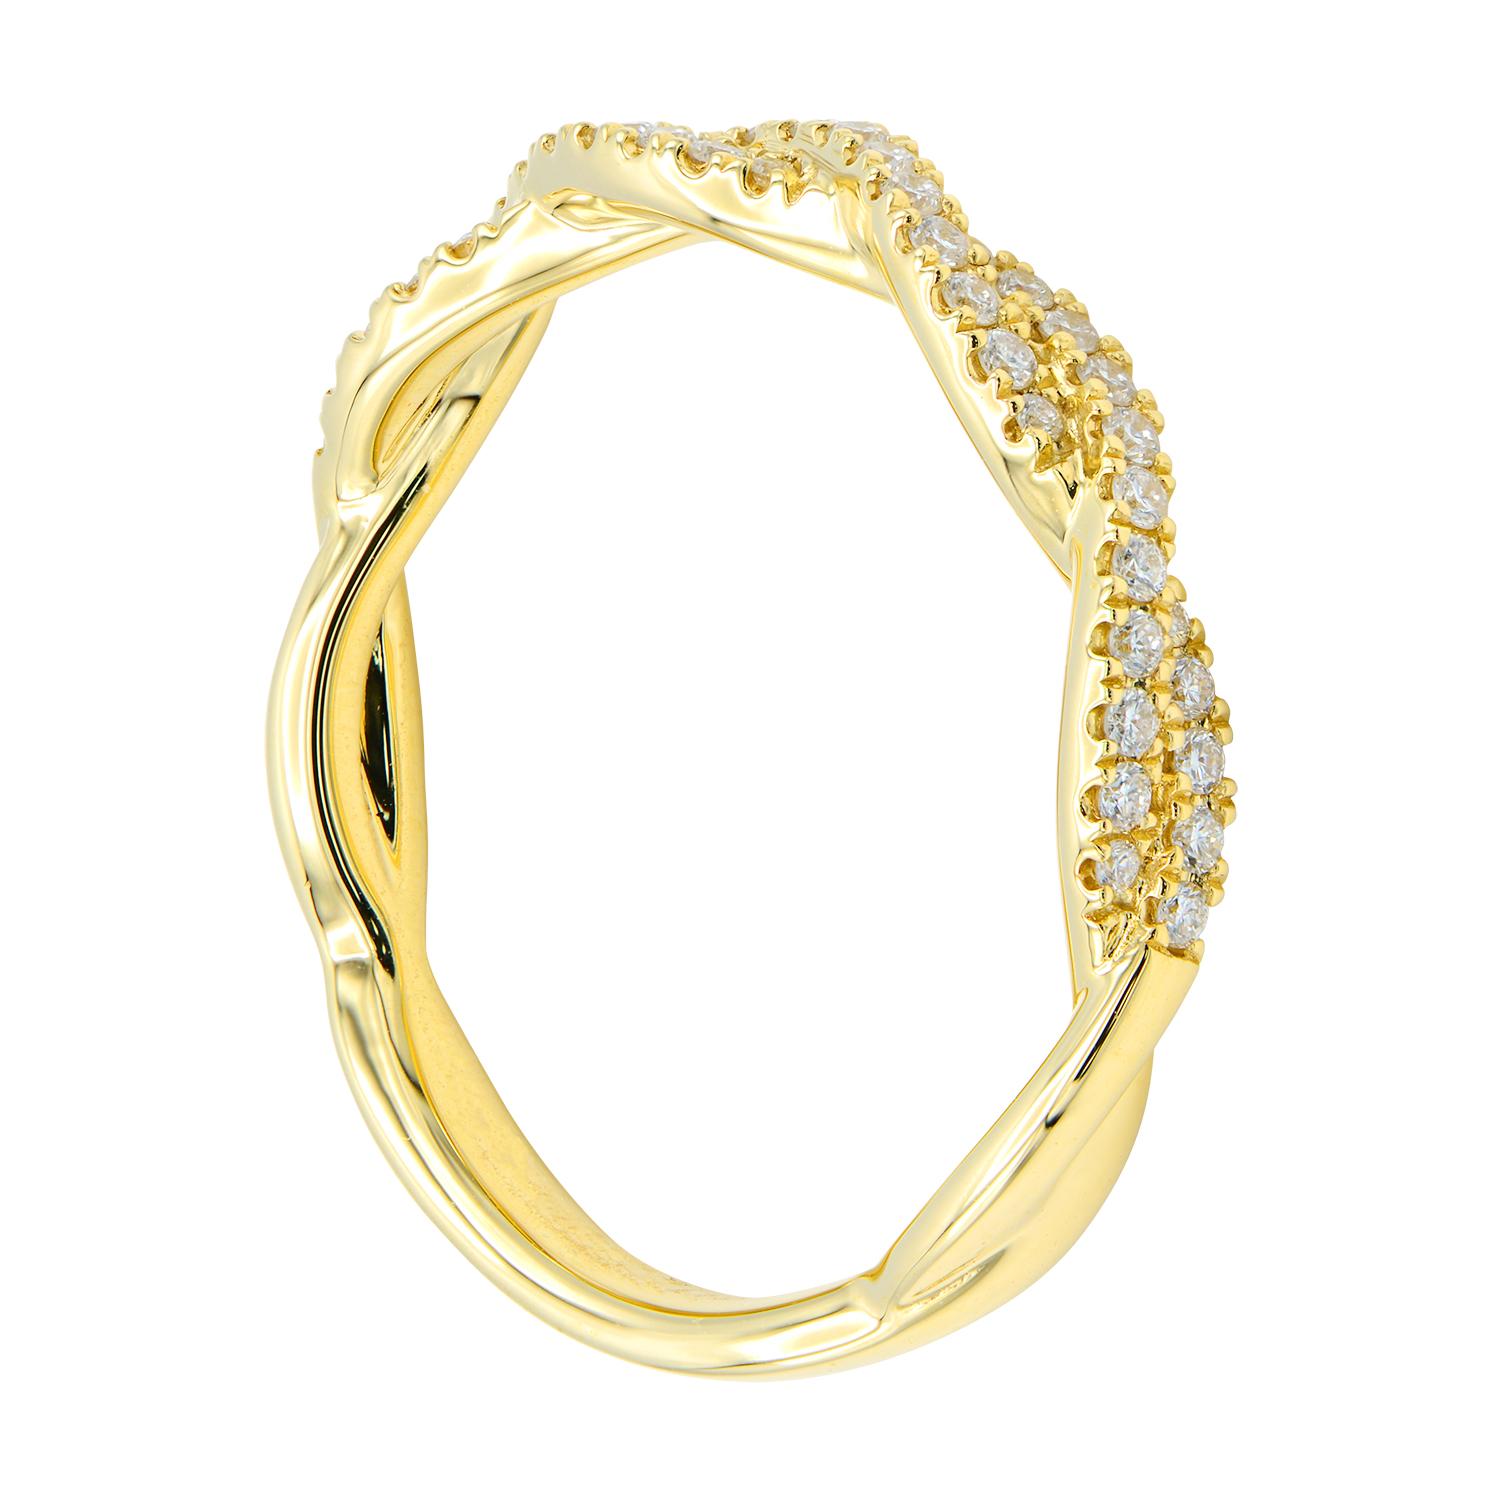 This stunning band is made from 2.4 grams of 18 karat yellow gold. The ring looks like there are two rows of diamonds being twisted around each other to create a beautiful variation to the classic diamond band. There are 43 round VS2, G color